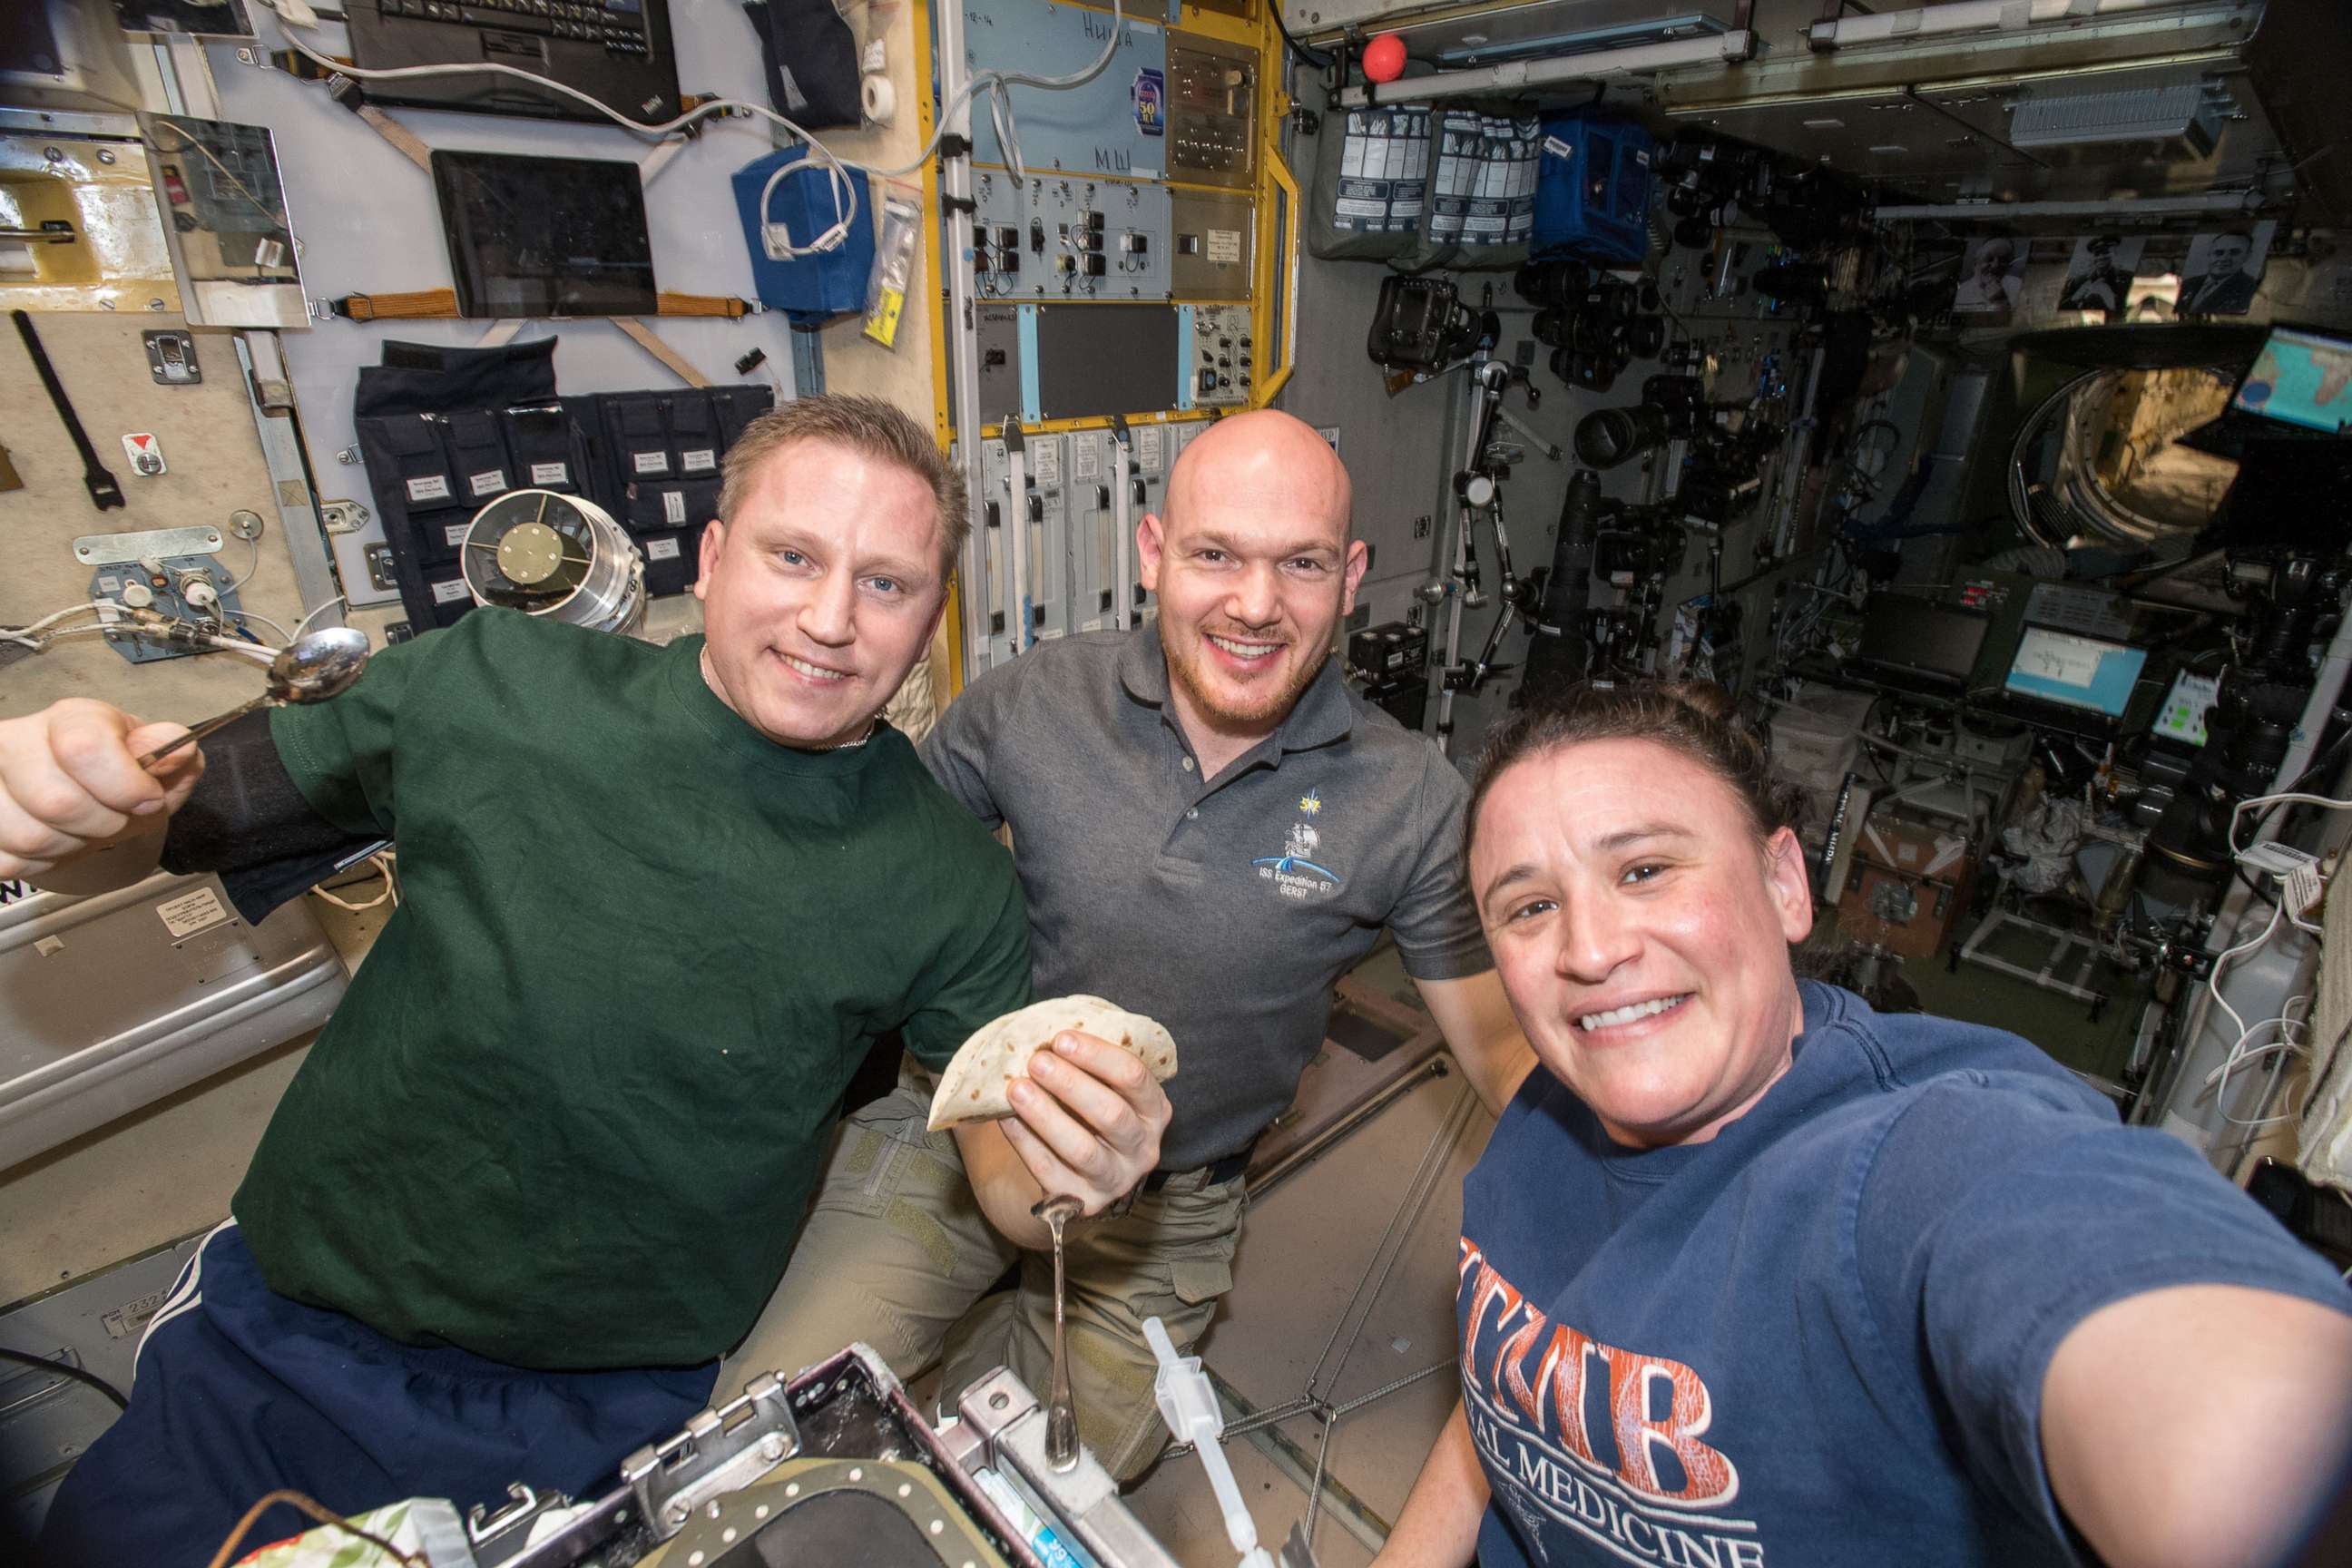 PHOTO: Flight Engineer Serena Aunon-Chancellor takes a group-selfie with Expedition 57 crewmates aboard the International Space Station, flight engineer Sergey Prokopyev and Alexander Gerst, in a photo shared on Nov. 9, 2018.